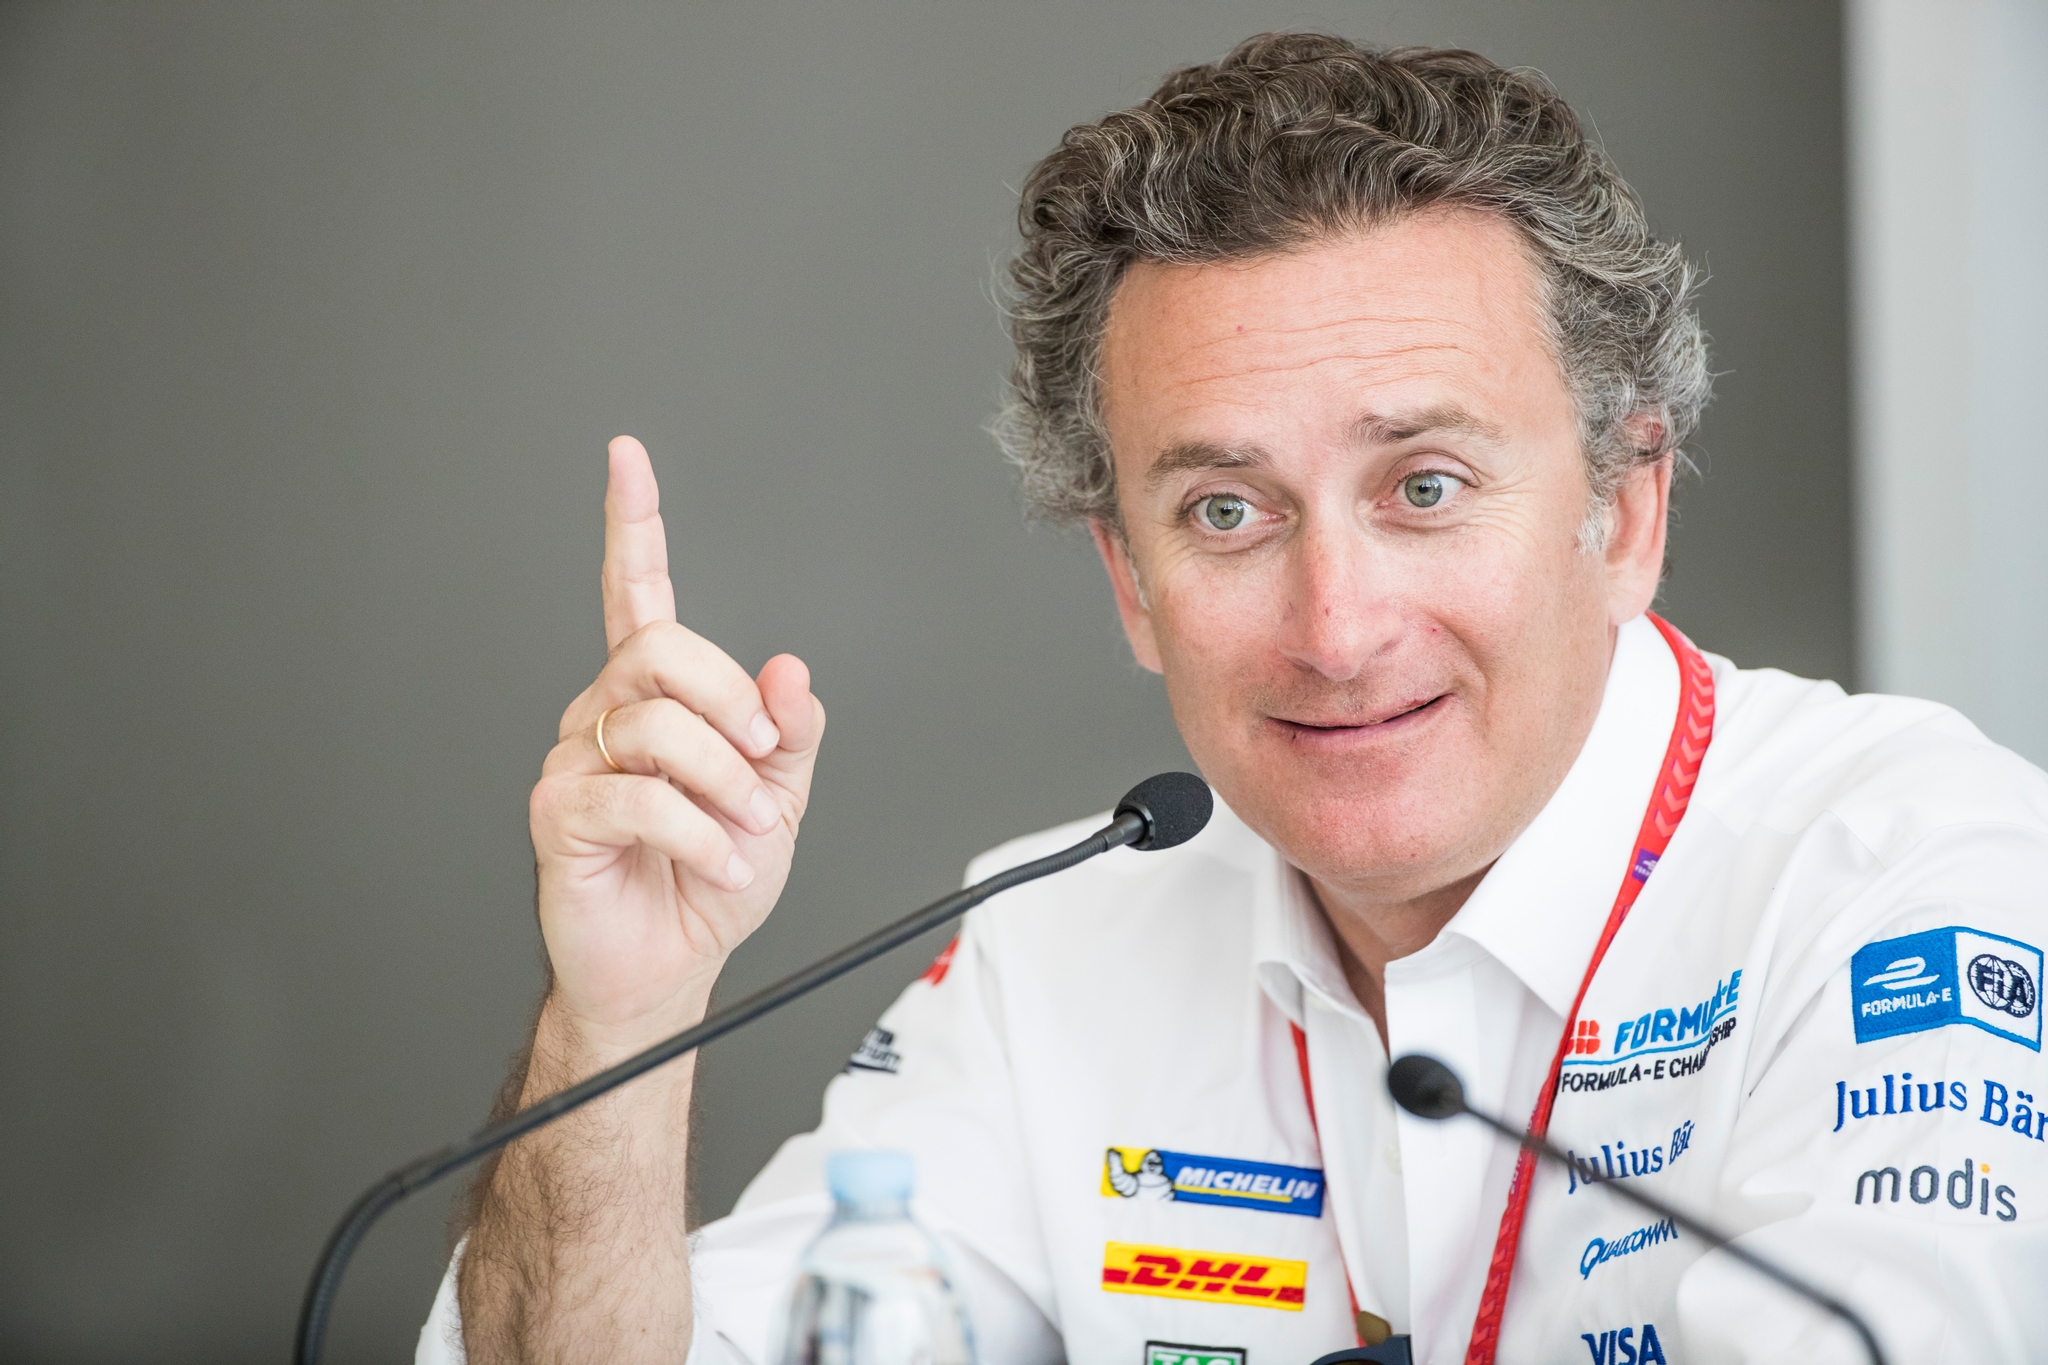 “It definitely has had an effect on the landscape of mobility” – Alejandro Agag on the impact of ABB Formula E